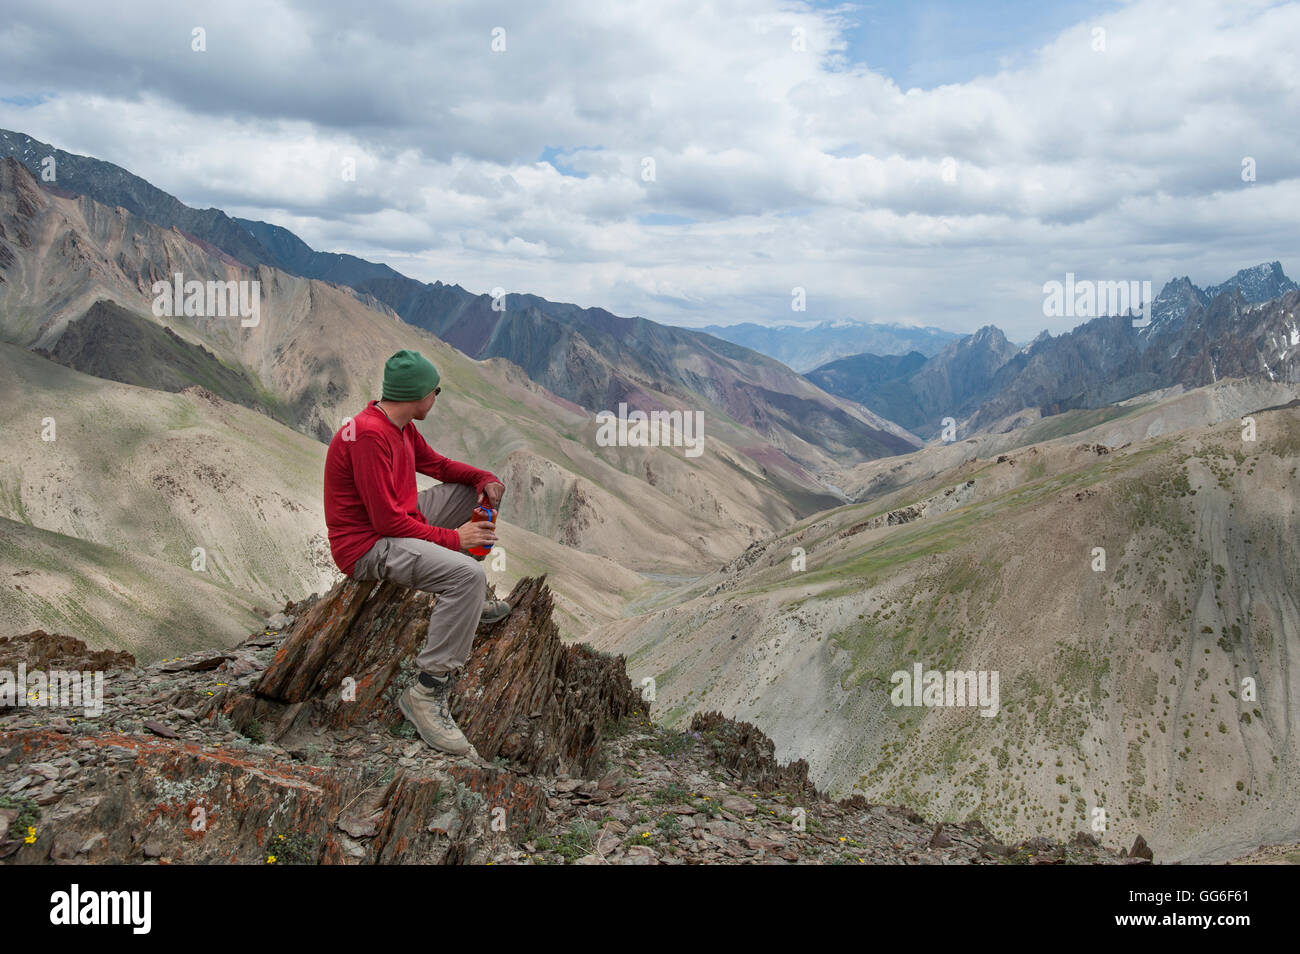 A trekker stops to admire the views from the top of the Konze La in the remote Himalayan region of Ladakh, India Stock Photo